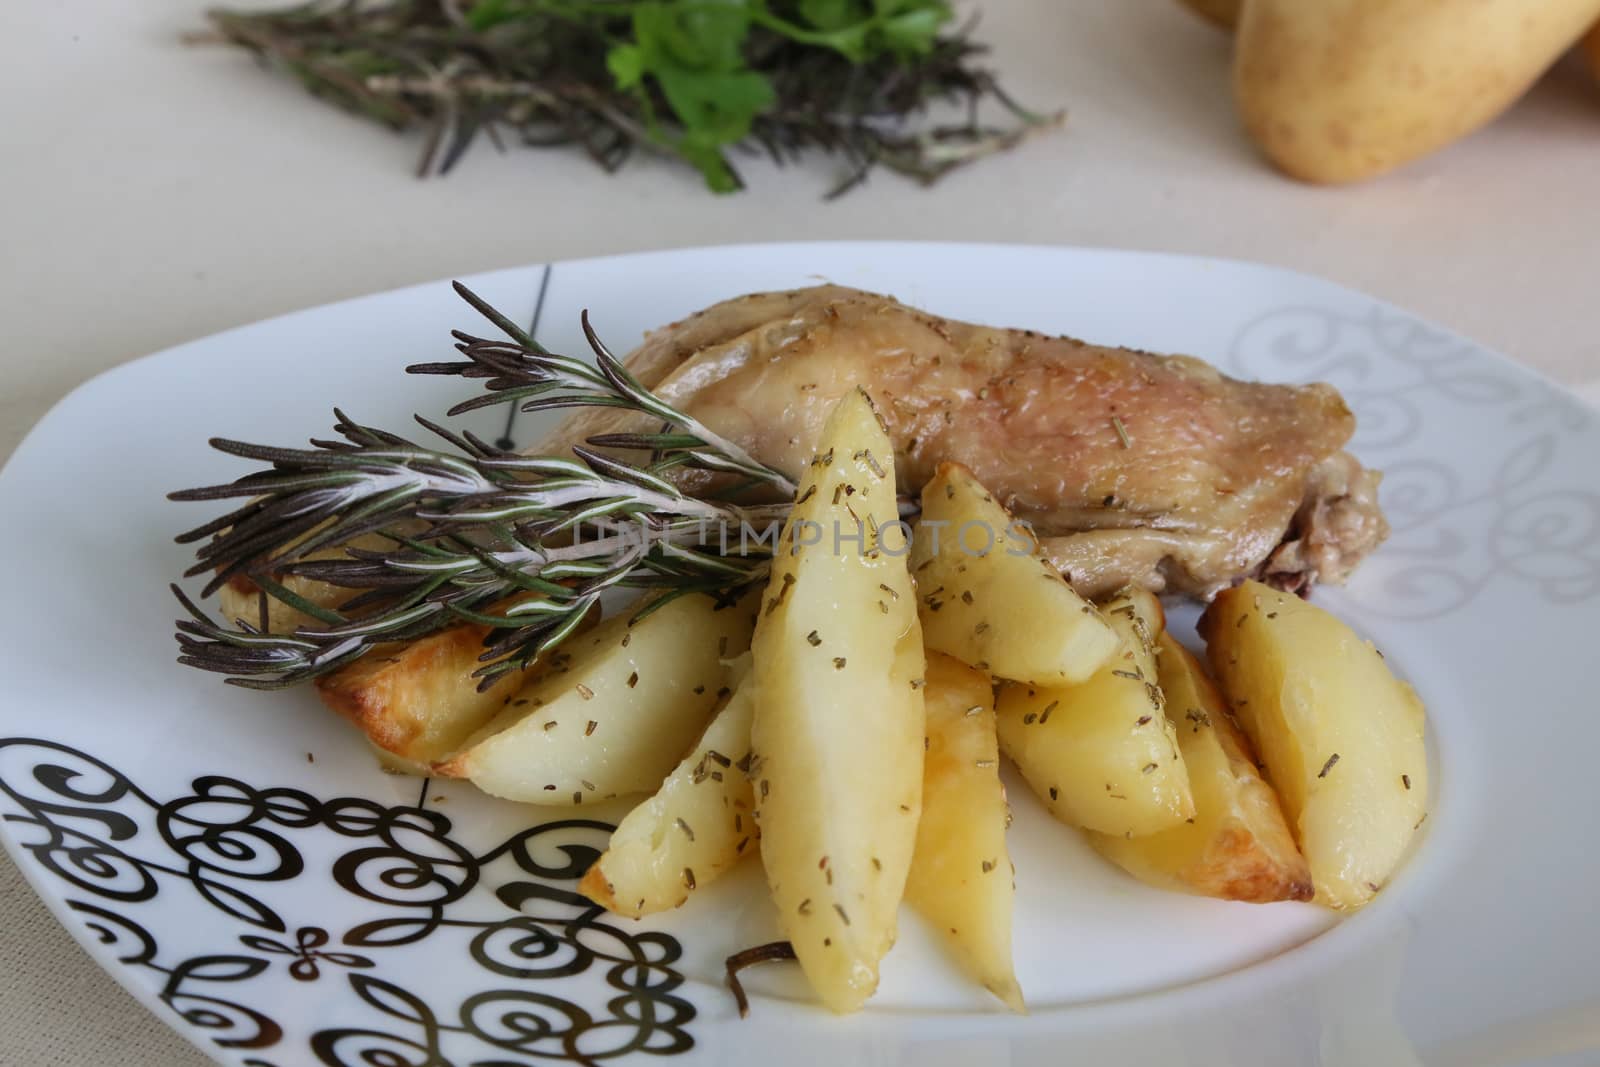 A plate of backed potatoes and chicken with rosemary